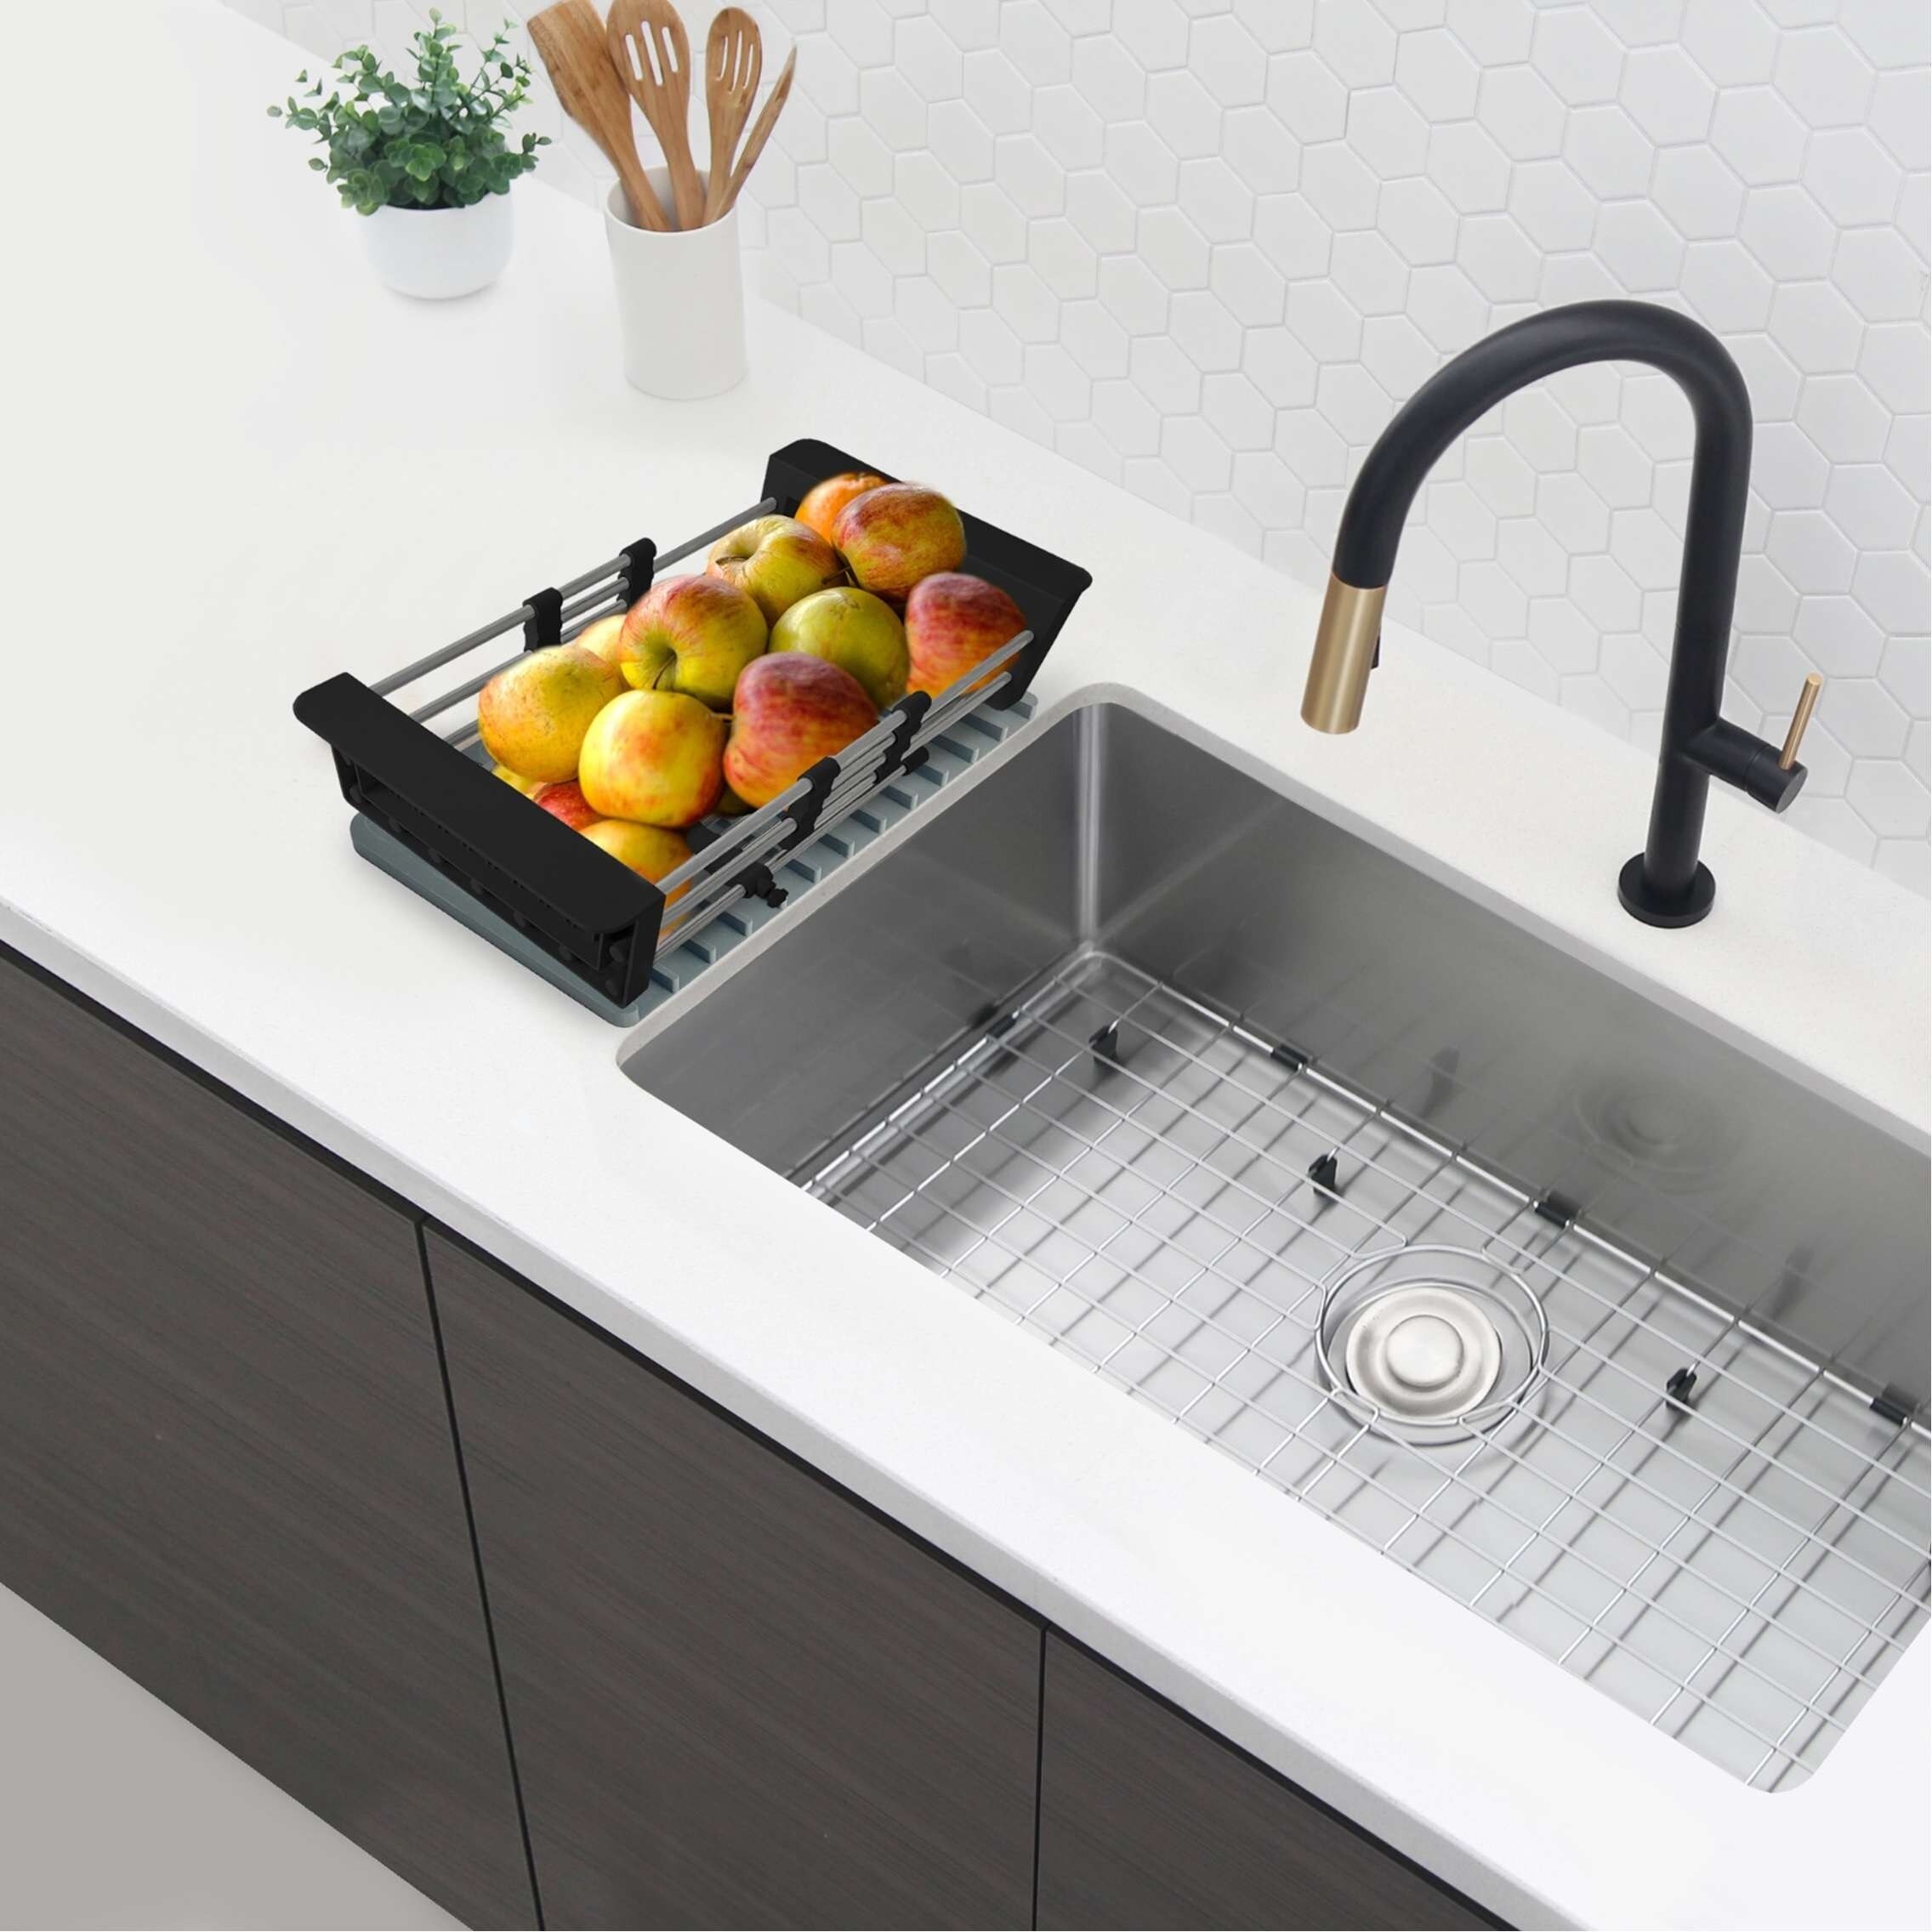 https://ak1.ostkcdn.com/images/products/is/images/direct/5530633de6db61c8e6c50e08db9e2fd7501bf8c2/STYLISH-Silicone-Drying-Mat-and-Trivet.jpg